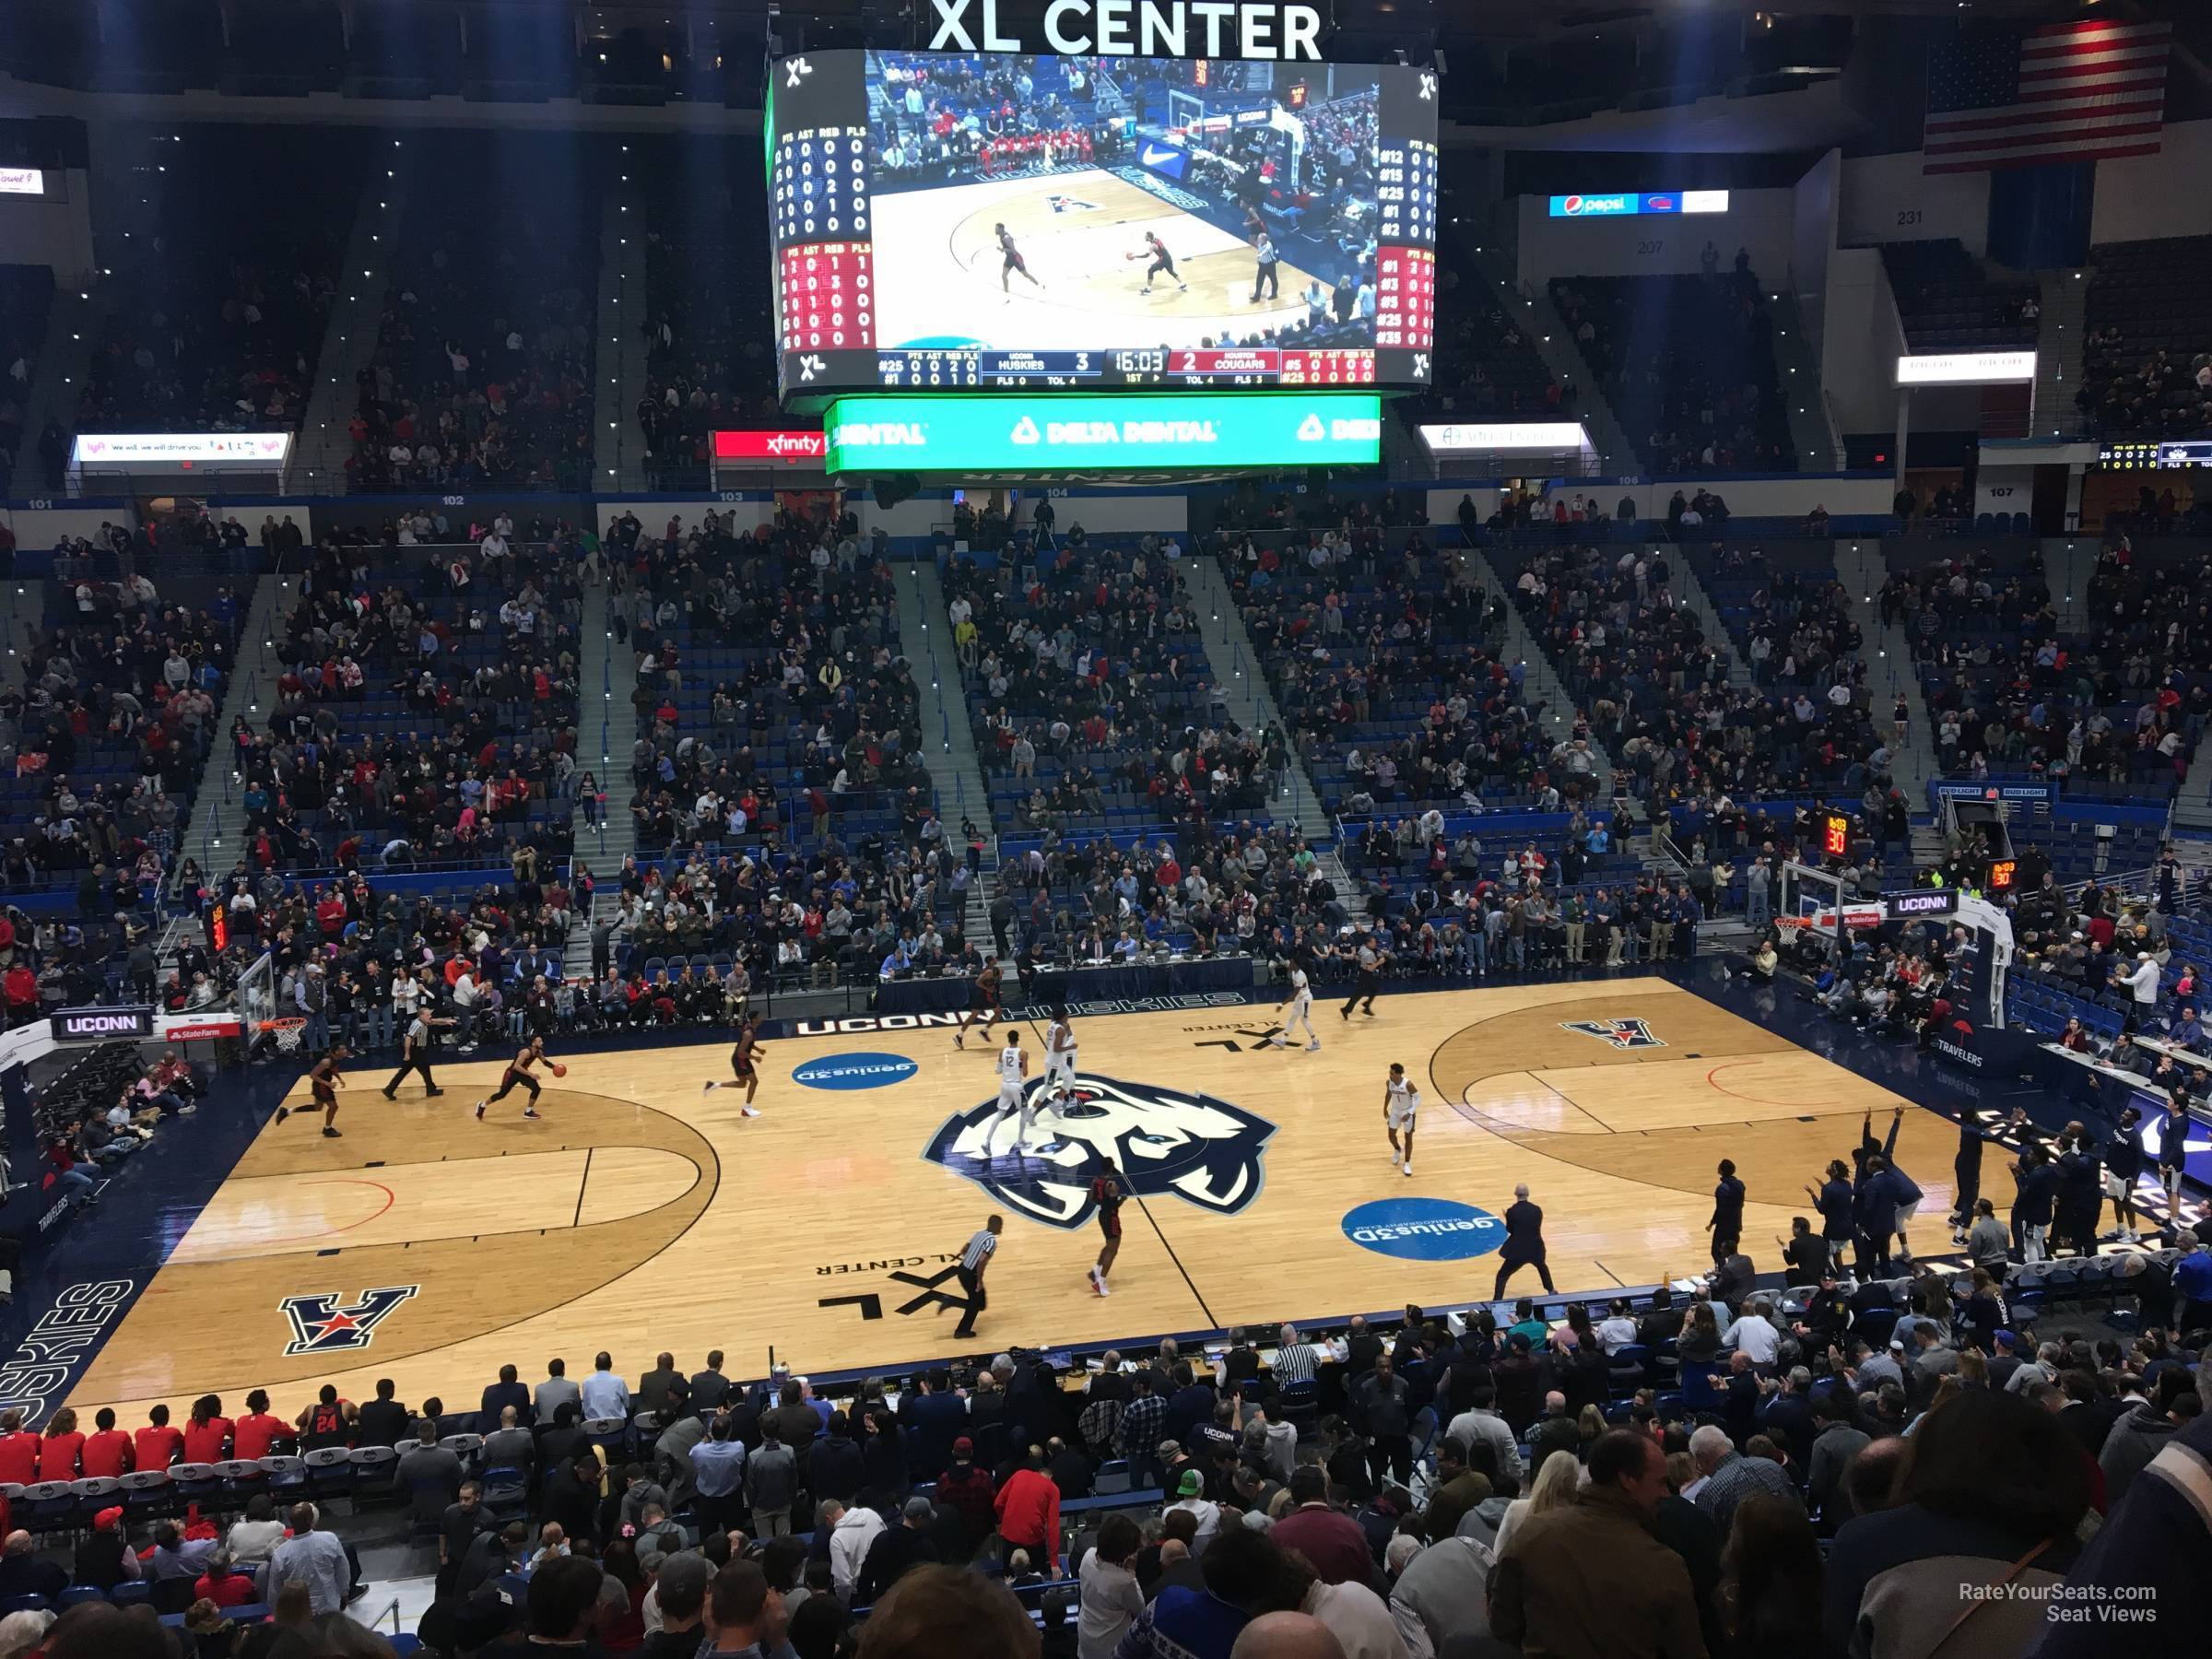 section 116, row r seat view  - xl center